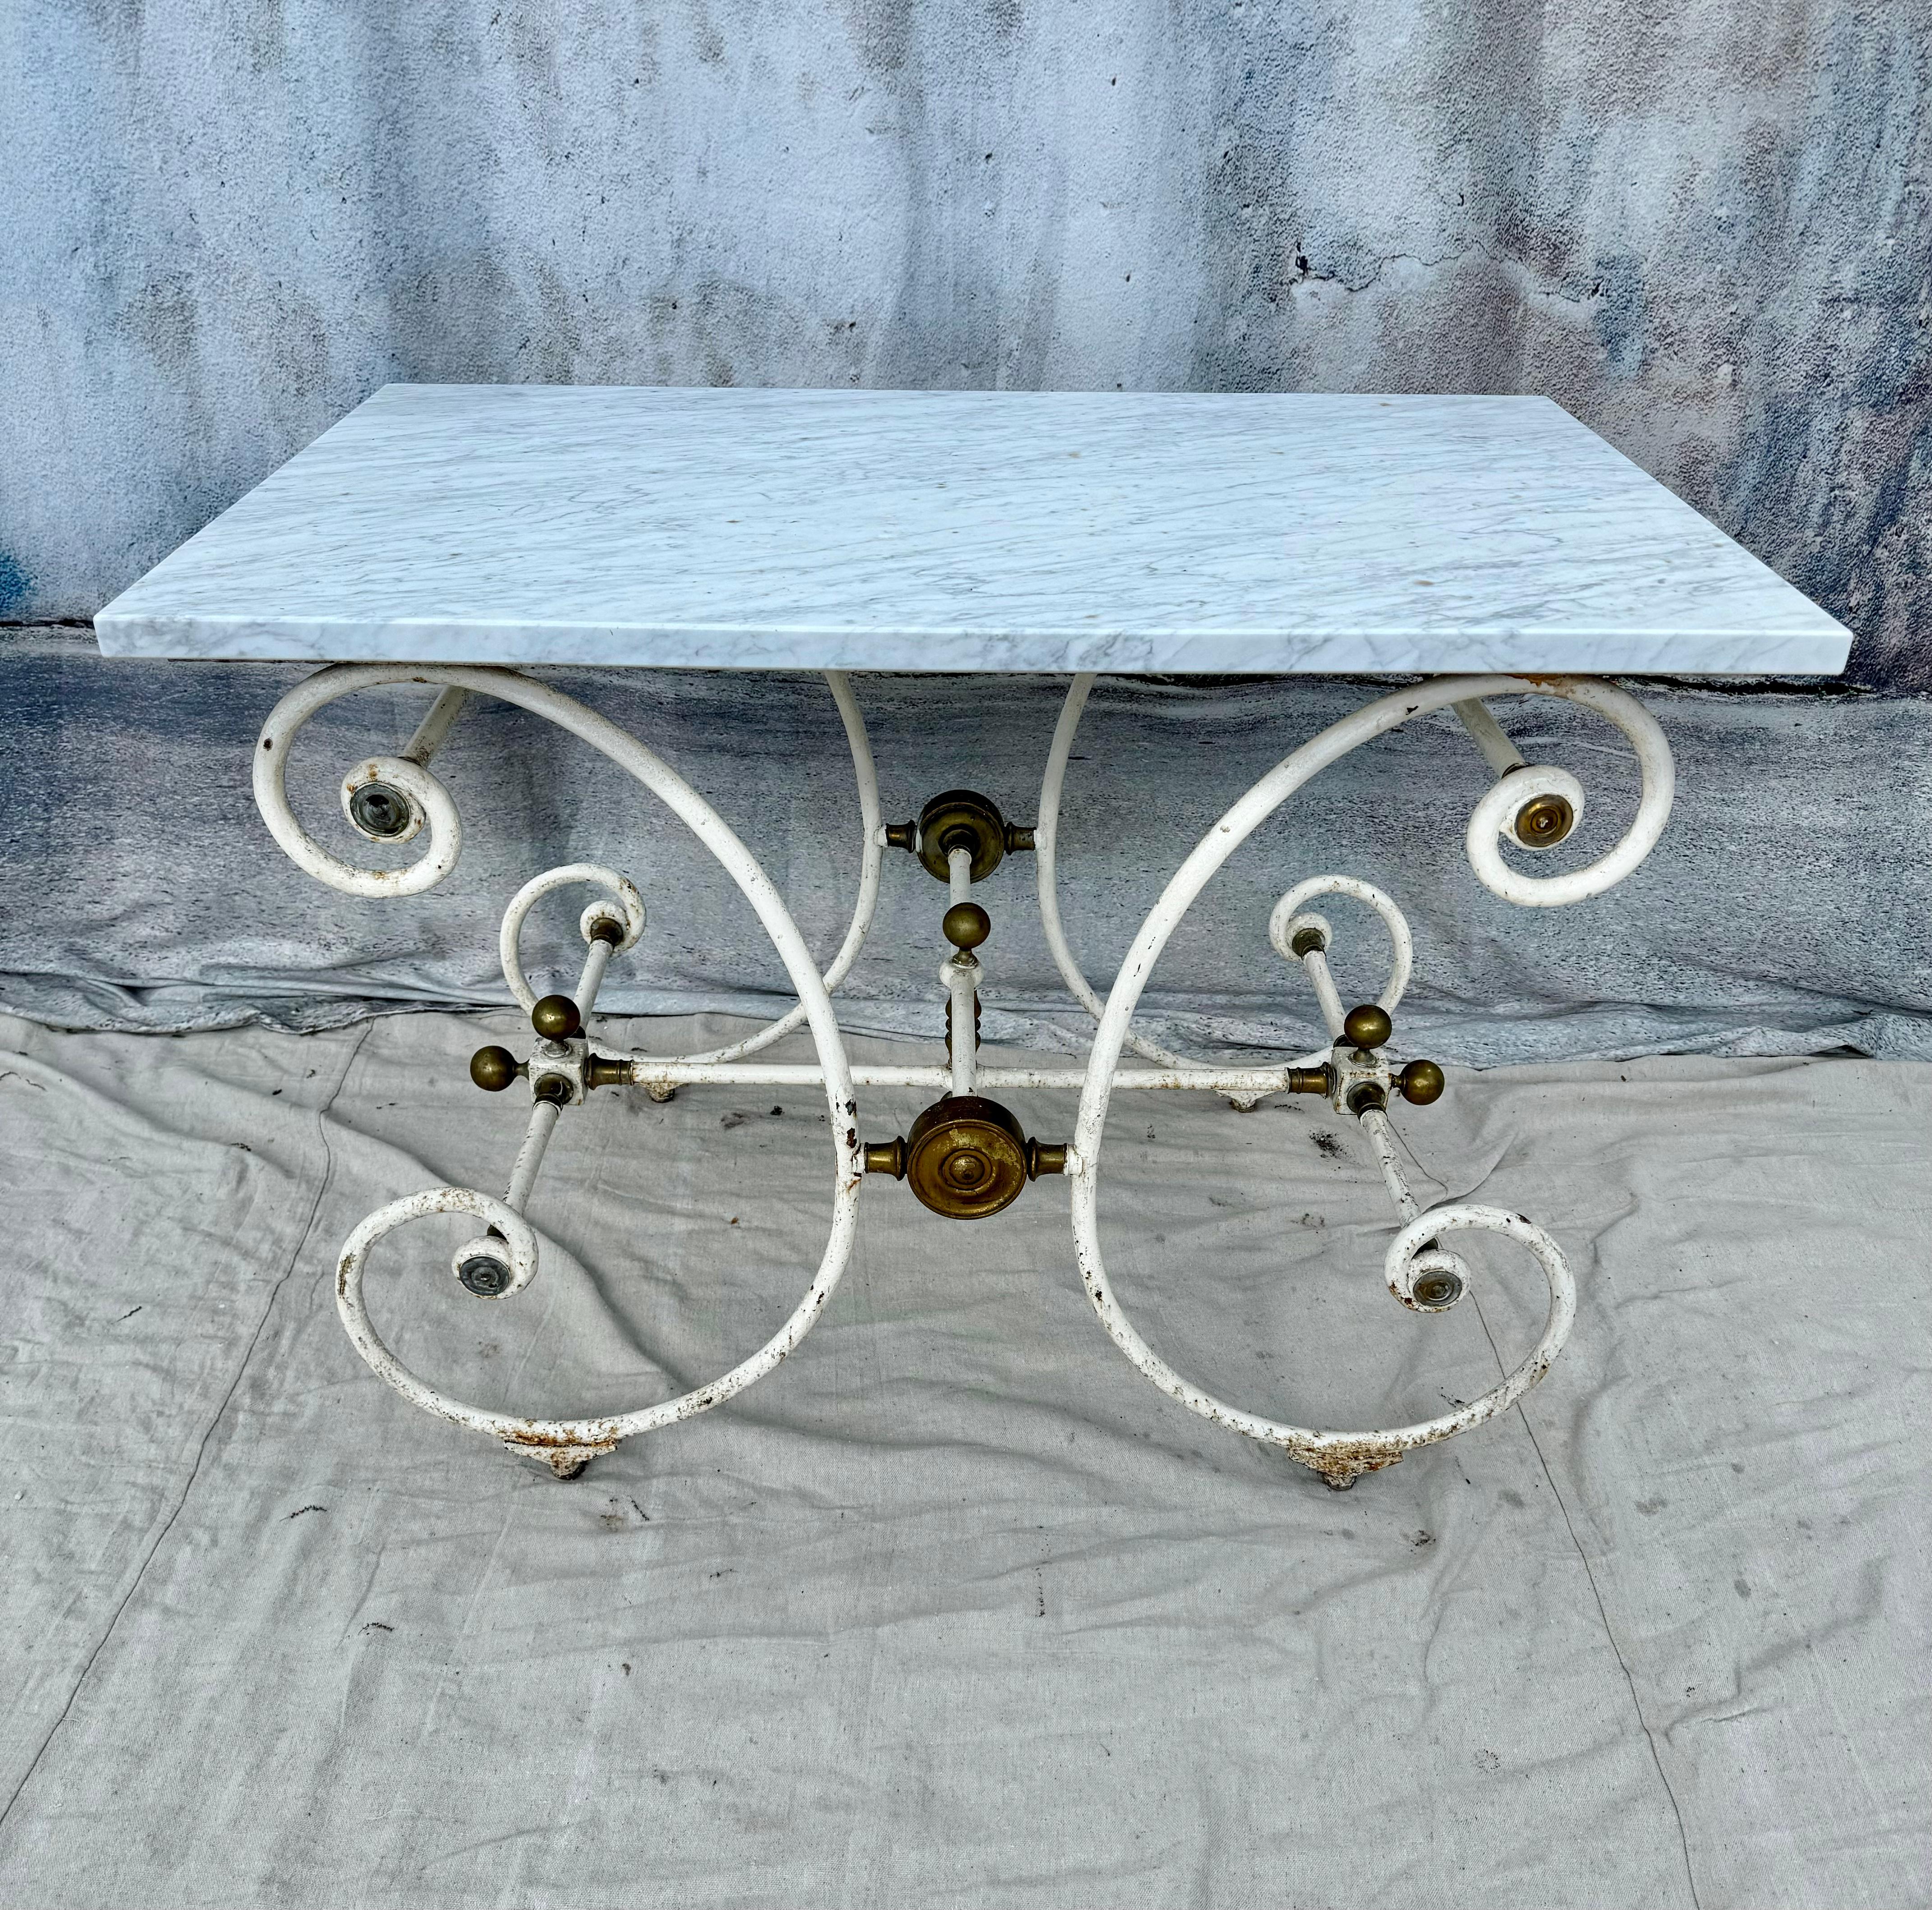 19th Century French baker's table by J. Mareschal, Paris.  Table features classic white marble top and curved wrought iron base. The table has bronze details as a finish. These tables were used for preparing and displaying the finest cuts of meat